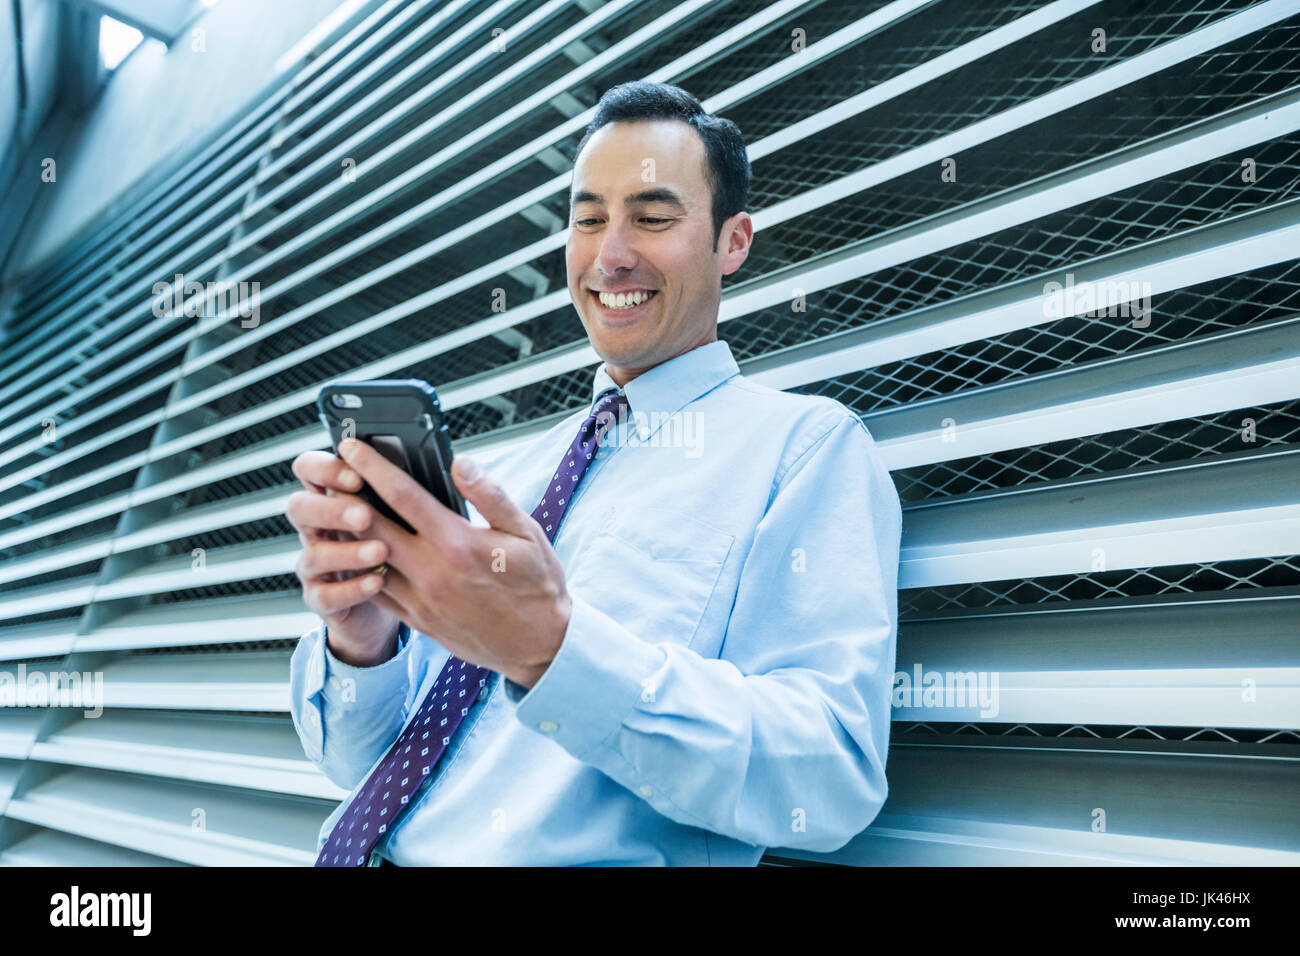 Smiling Mixed Race businessman leaning on wall texting on cell phone Stock Photo